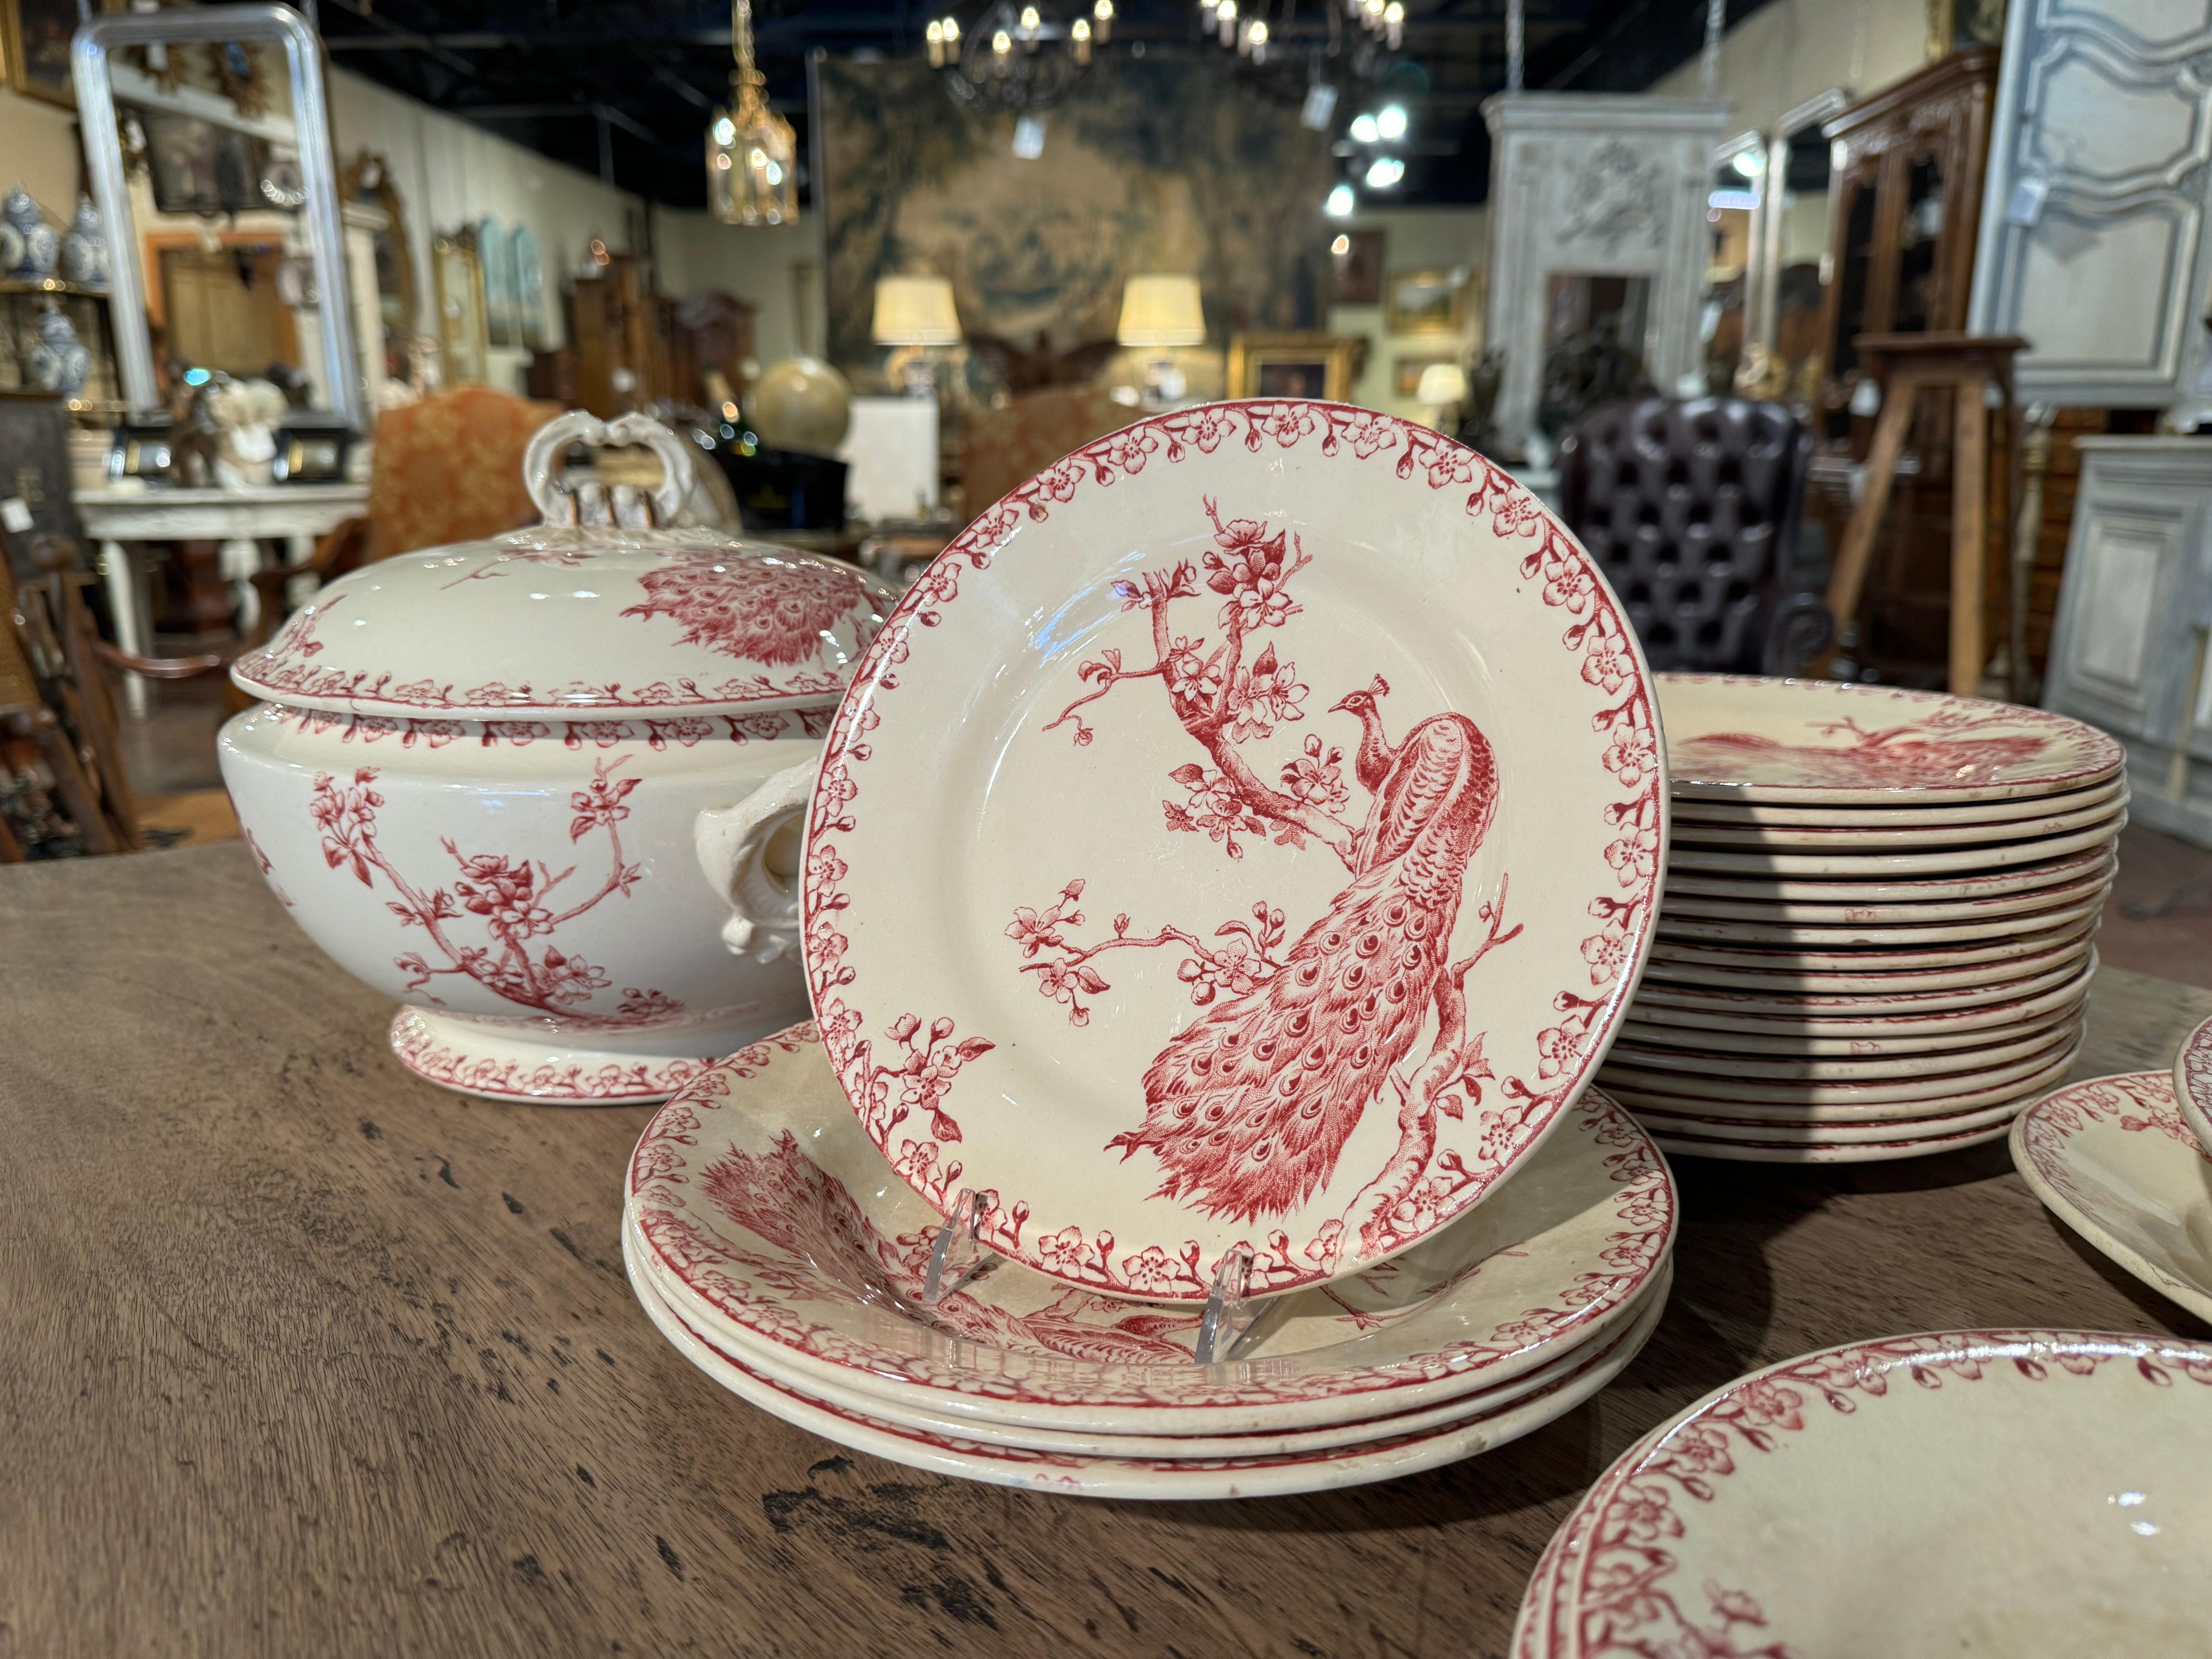 Decorate a dining table or shelving with this antique porcelain service set of 32 pieces. Crafted in France circa 1880 by Gien, each plate and dish features a large peacock, and is stamped on the bottom 